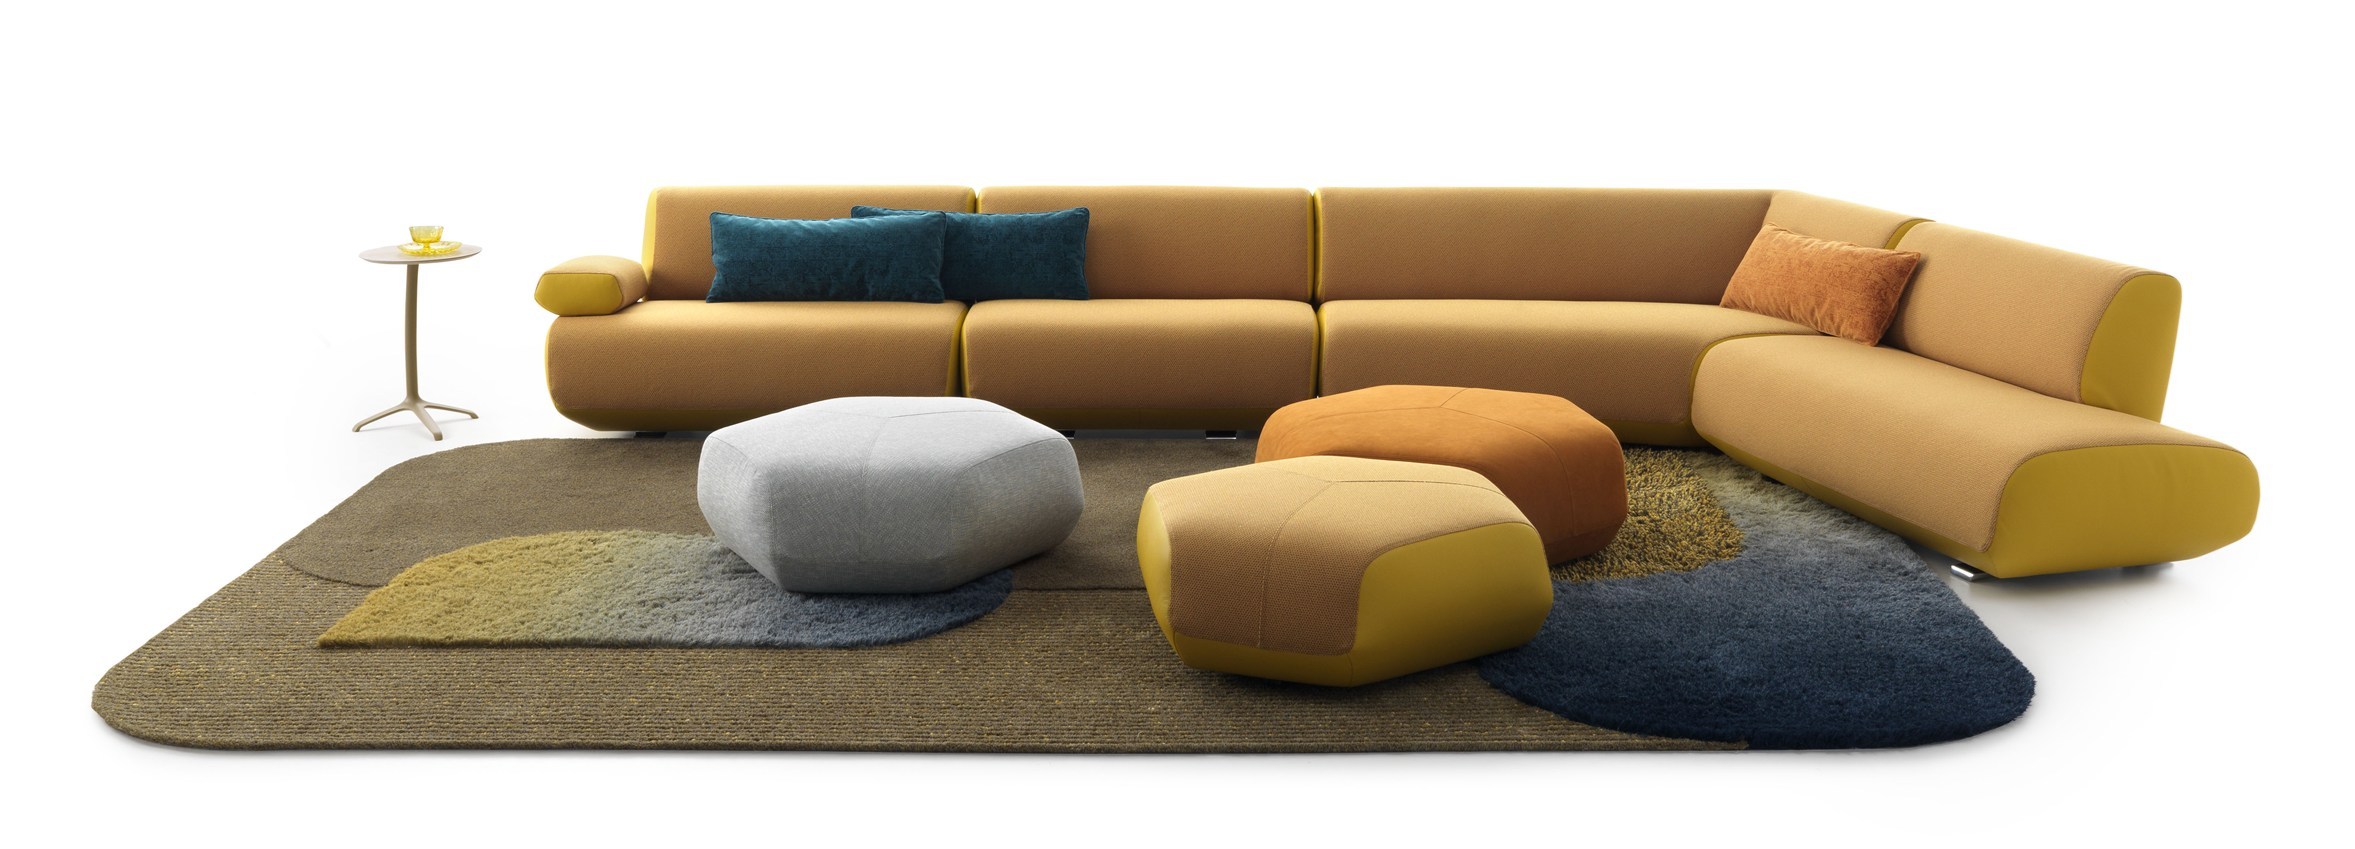 Guadalupe Sectional by Leolux